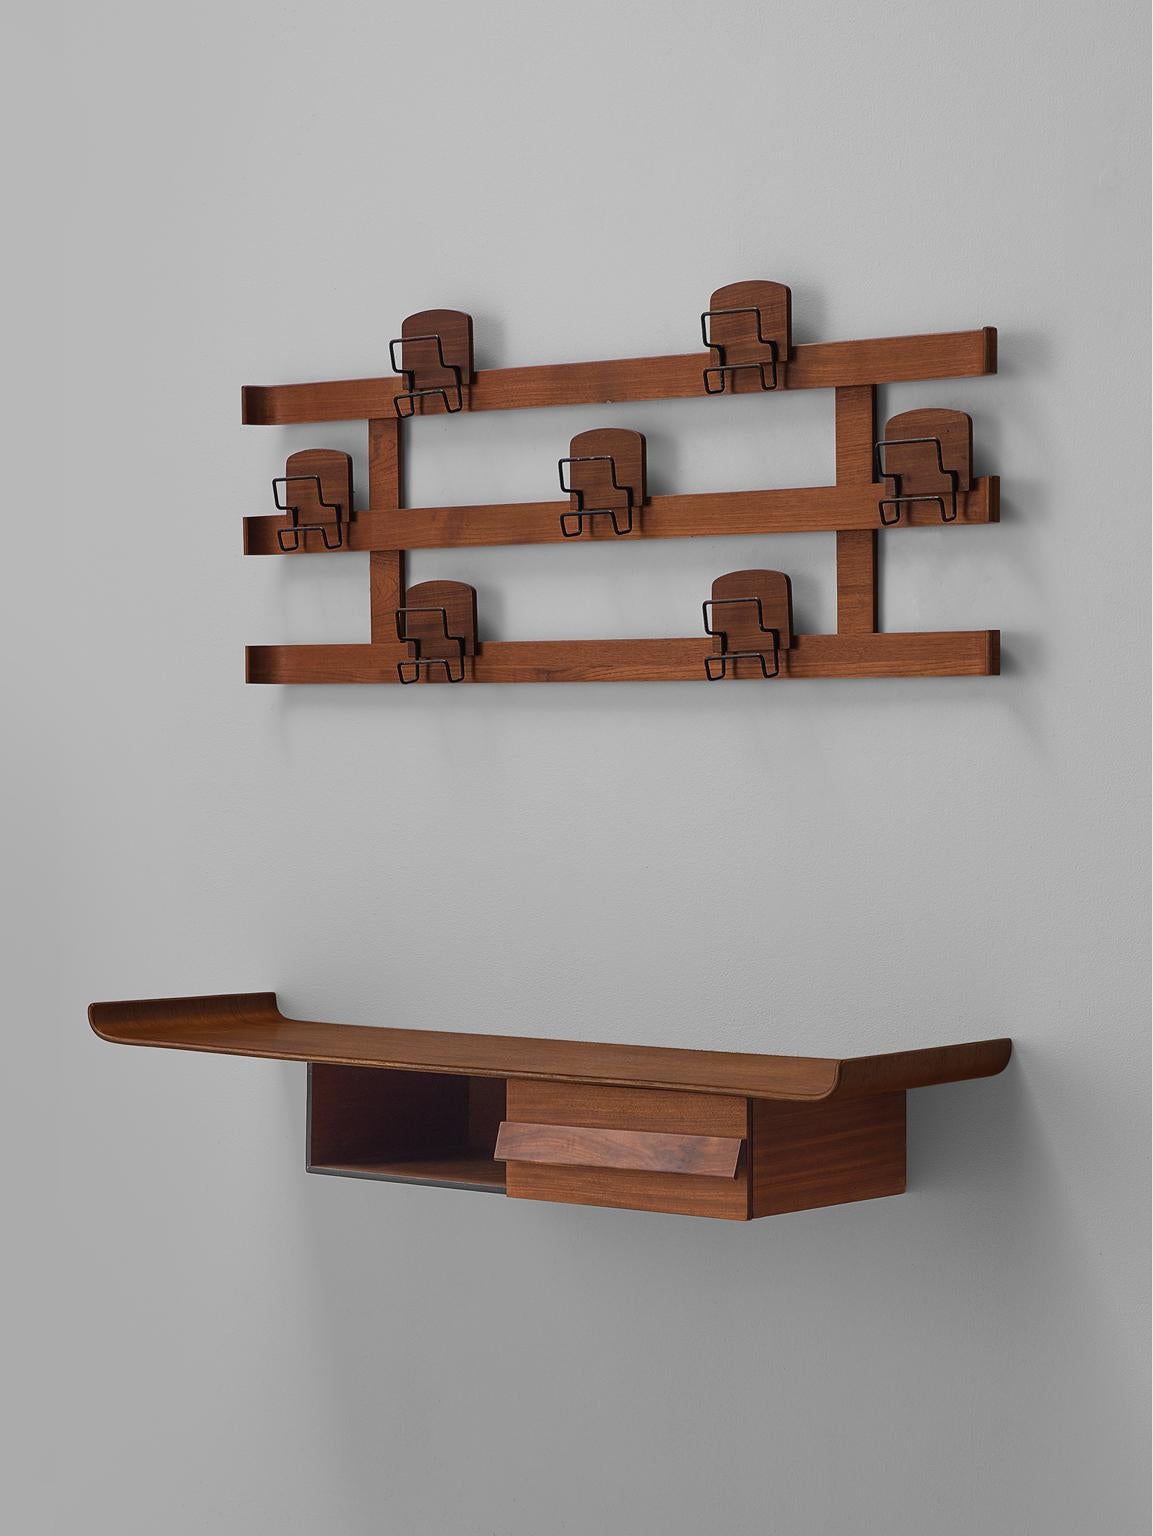 Vestibule set including shelf coat rack, walnut and steel, Italy, 1950s

This elegant set is an ensemble of a coat rack, shelf and bench. The set is executed in warm walnut and features many fine details such as the upward bent edges of the edges